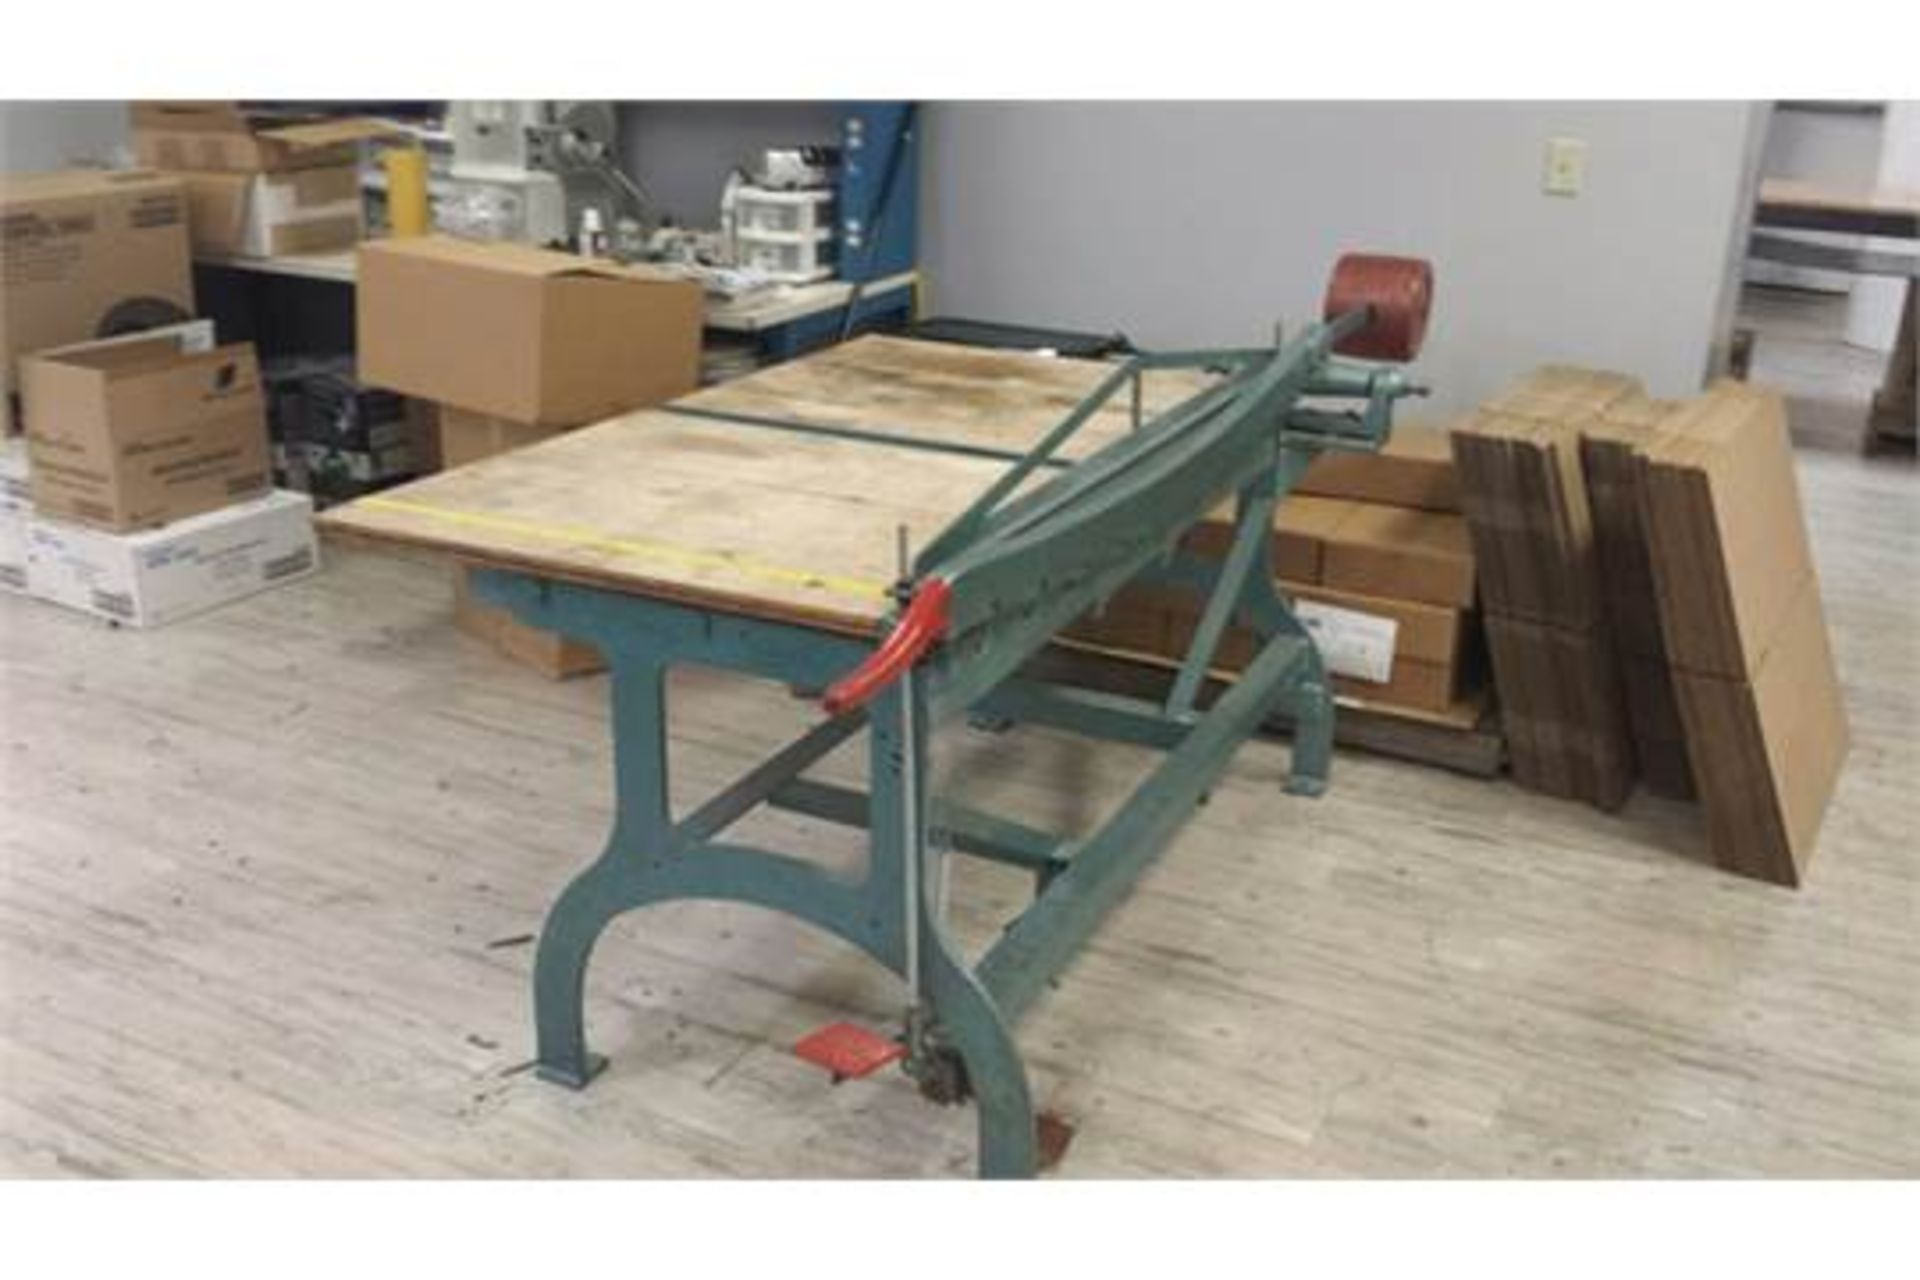 60" GUILLOTINE CUTTER W/MATERIAL LOCKDOWN PEDAL FOR PRECISE CUTTING